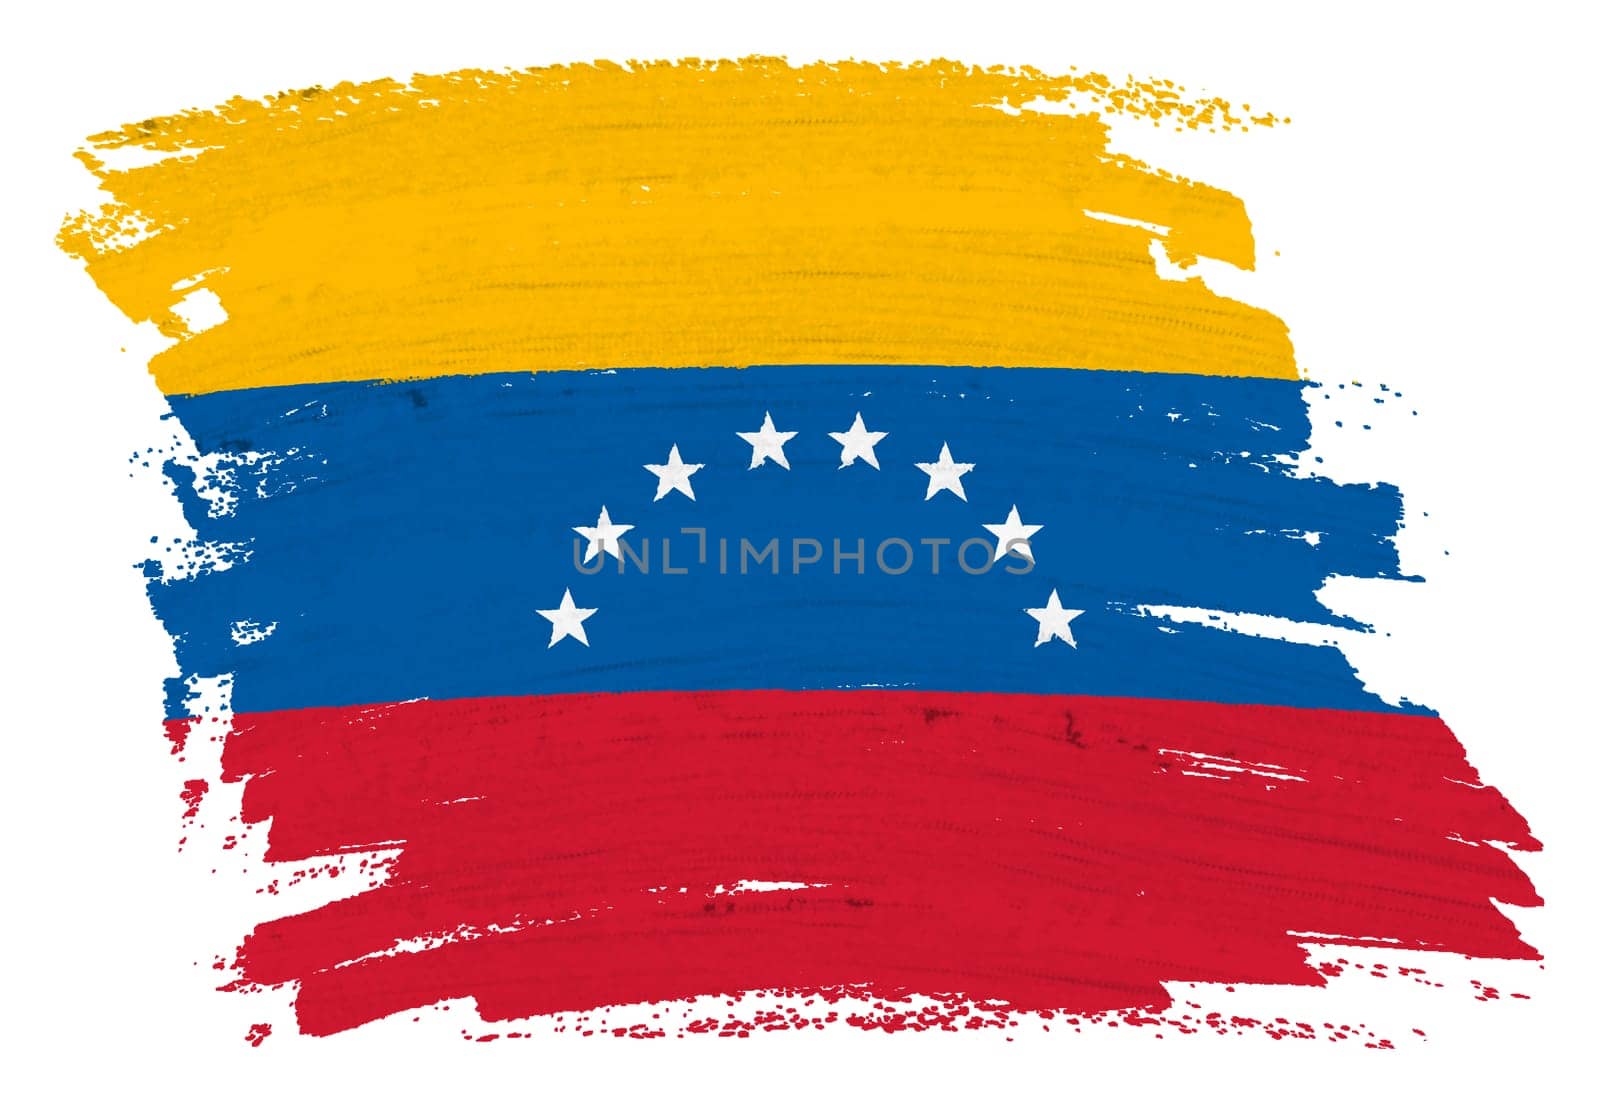 Venezuela flag paint splash brushstroke 3d illustration with clipping path by VivacityImages